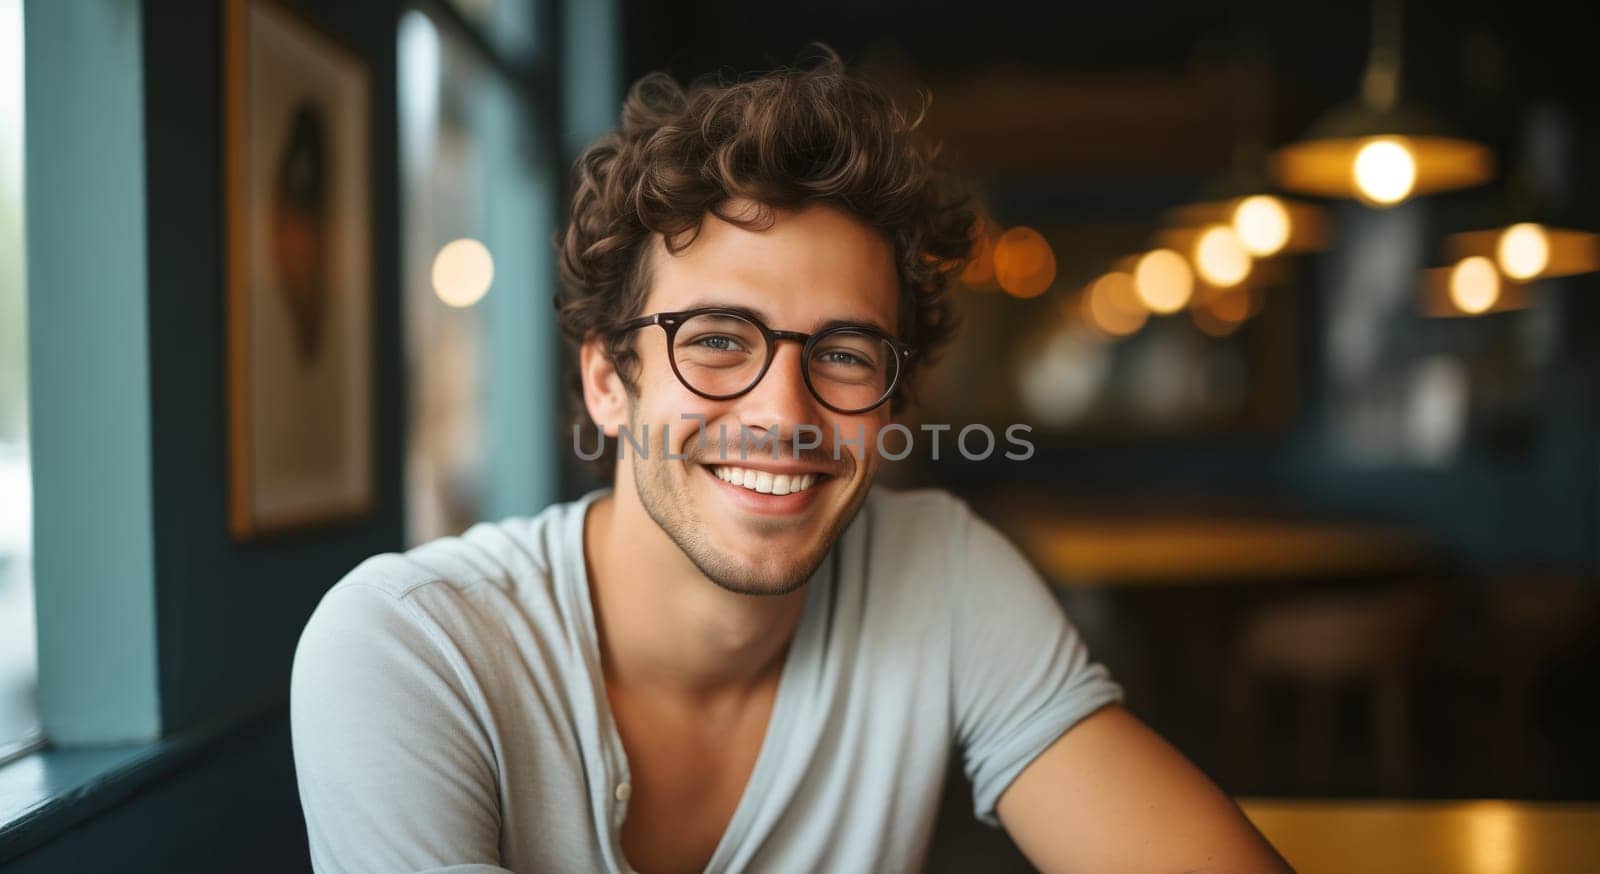 Portrait of happy smiling young man client in coffee house or cafe, looking at camera